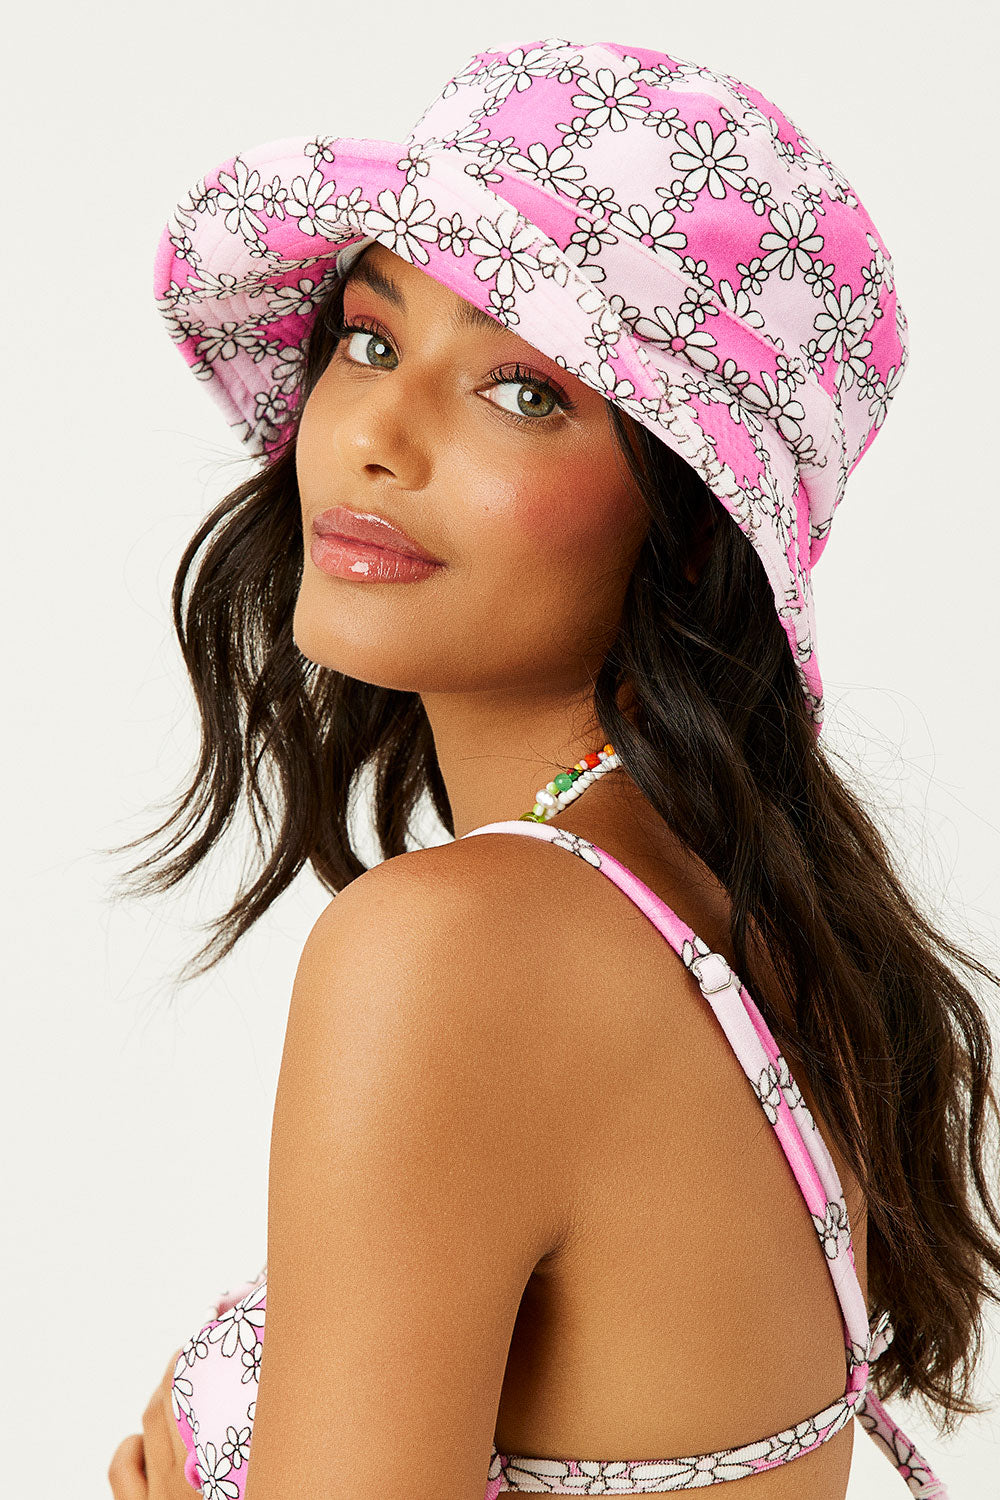 African Print Bucket Hat (Pink) Small ( Head Circumference 21 Inches)